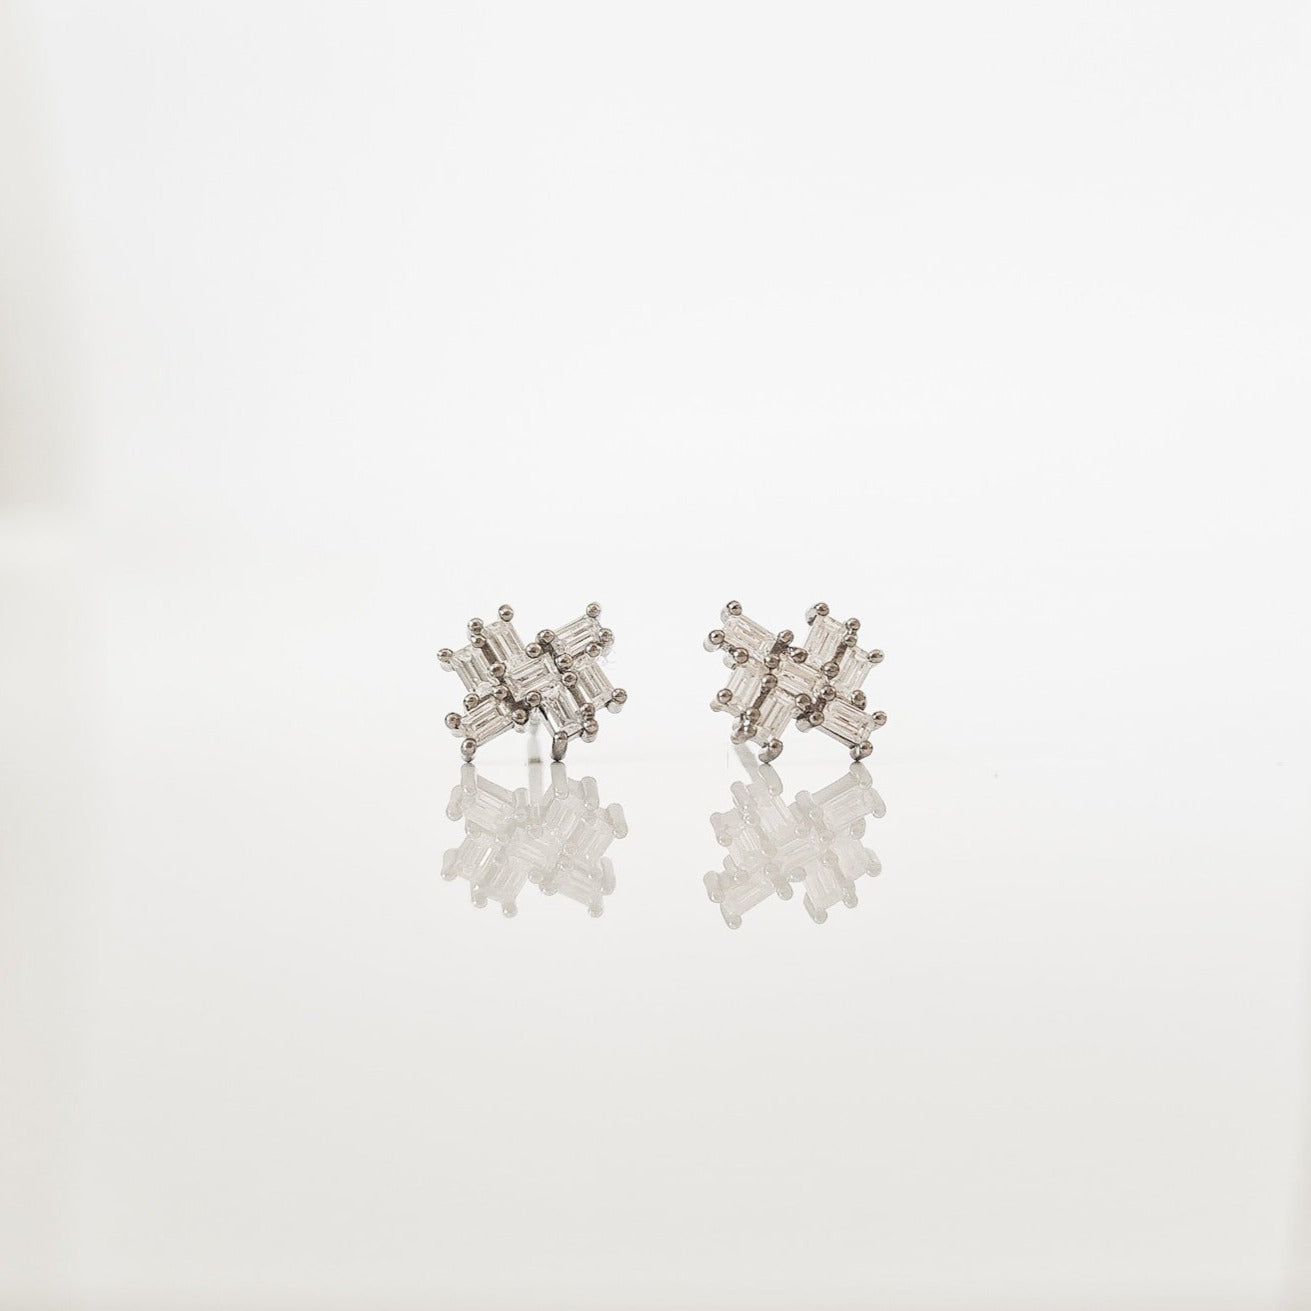 Baguette cut moissanite cluster studs set in sterling silver as worn by Marciel Hopkins for her wedding